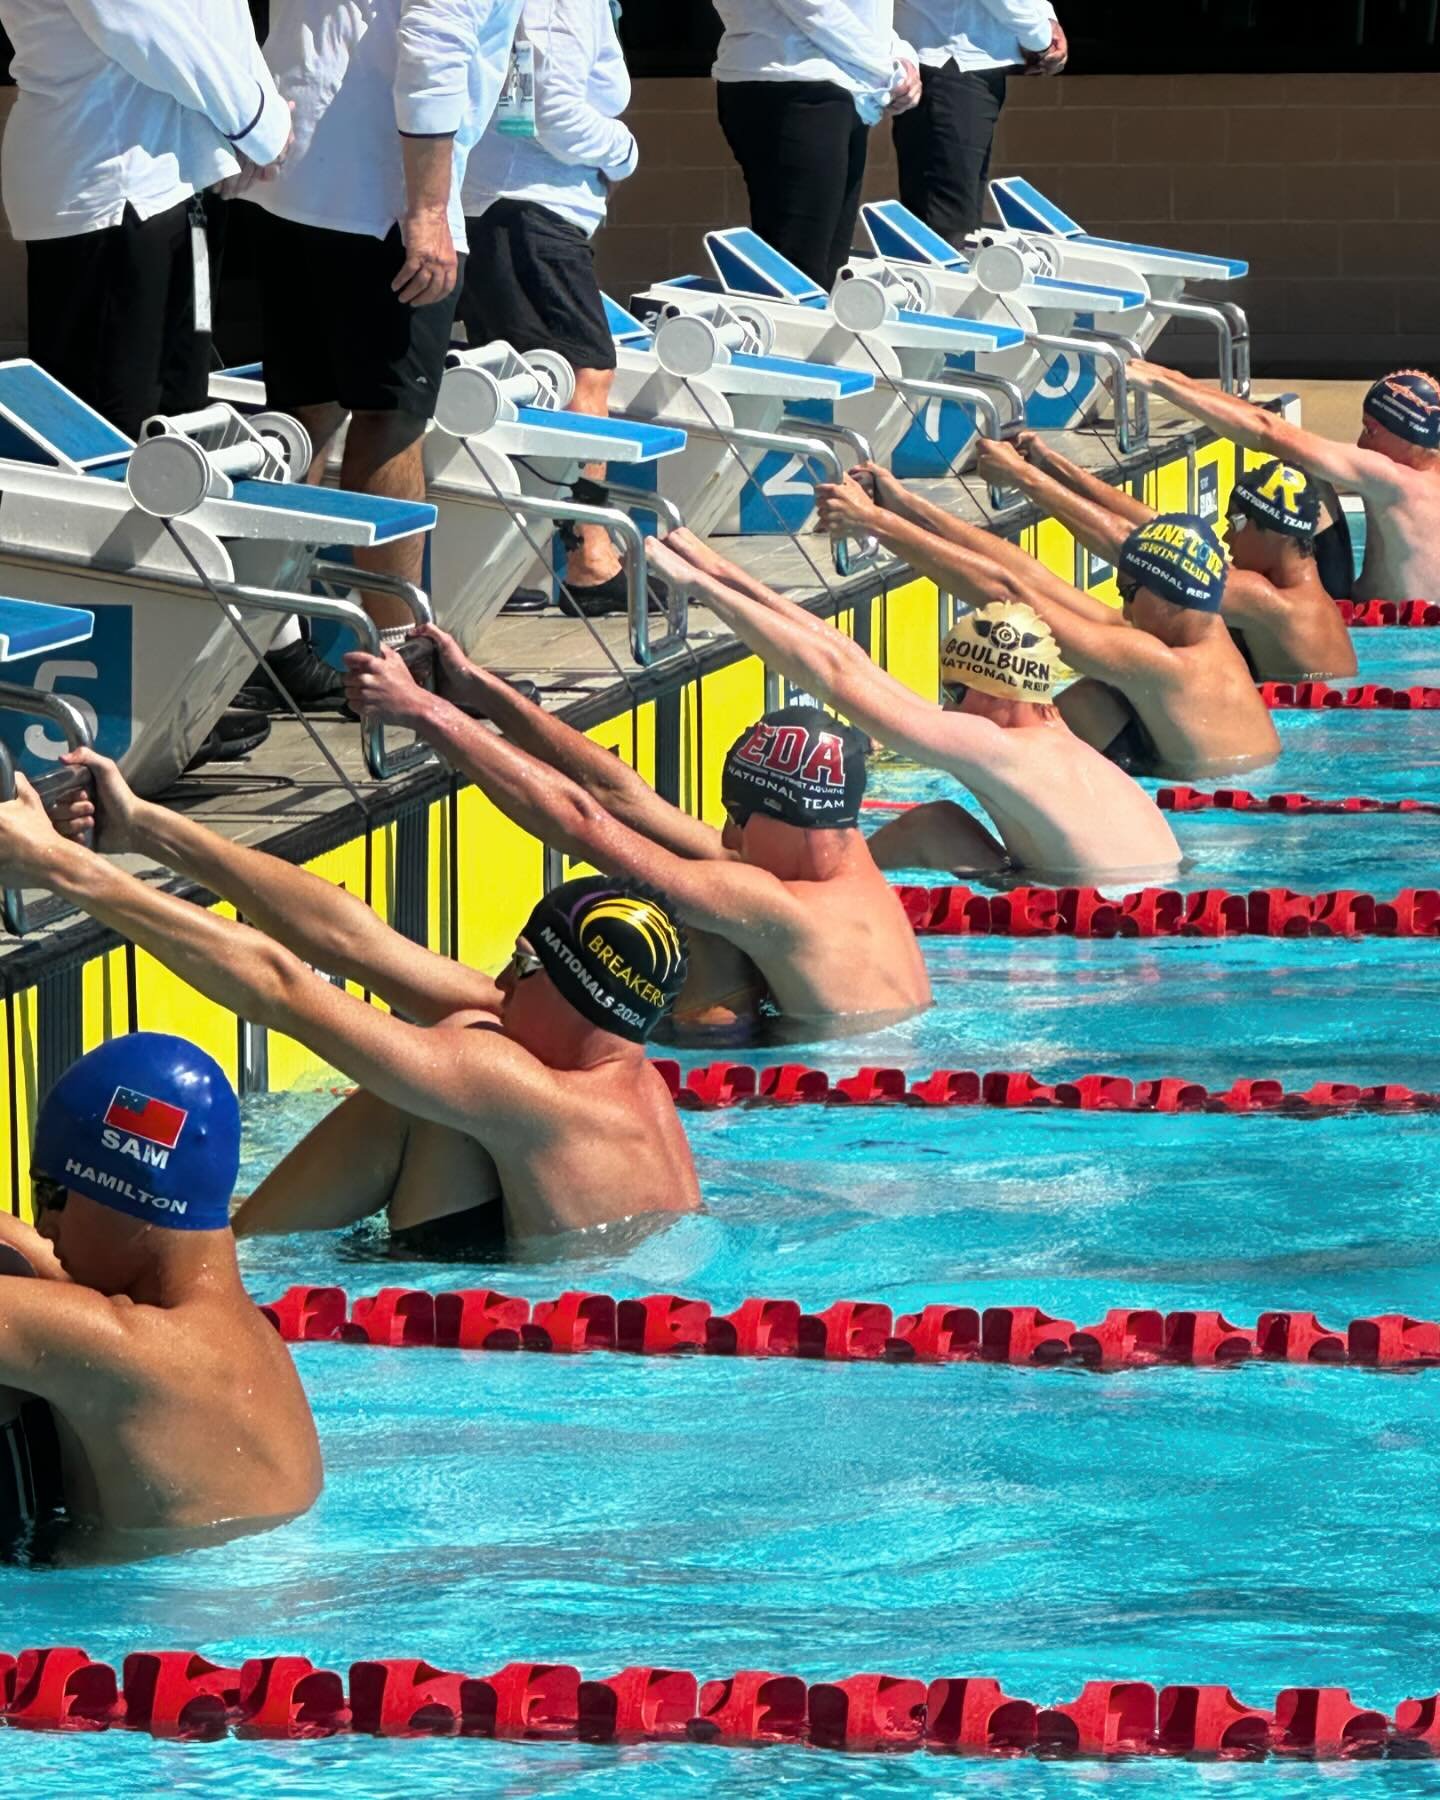 Australian Age Championships
&bull;
Our second last day of racing and we had Ruolan, Josh and Mia in the pool. Ruolan swam a solid 200m IM and both Josh (100m Backstroke) and Mia (200m IM) swam PB&rsquo;s in their events.